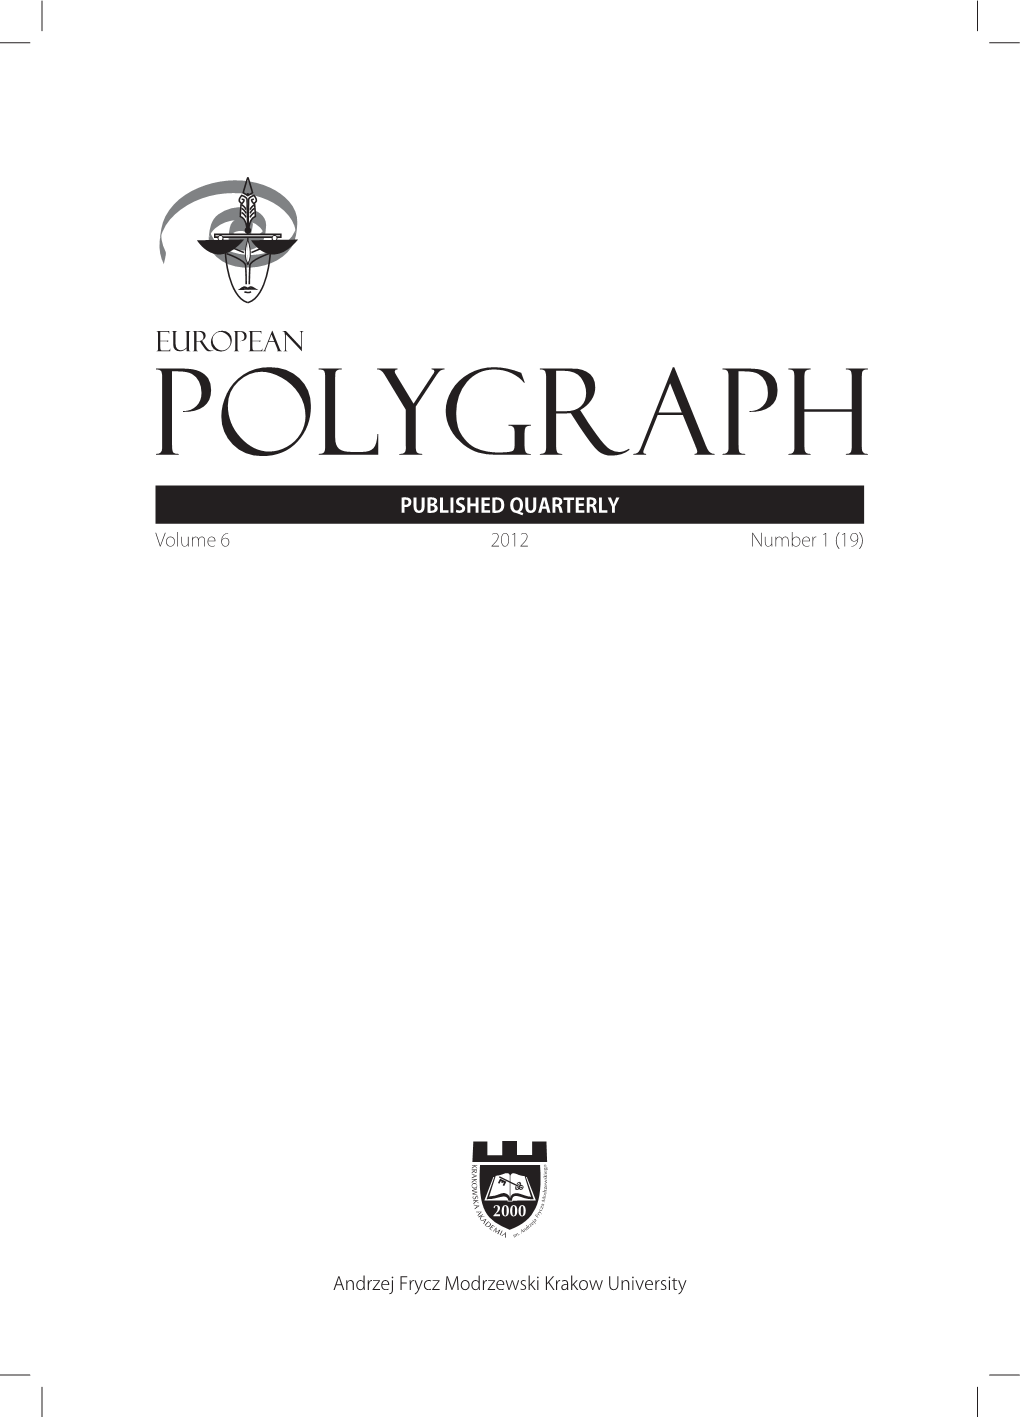 Meta-Analytic Survey of Criterion Accuracy of Validated Polygraph Techniques. Report Prepared for the American Polygraph Association Board of Directors, “Polygraph” Special Edition, 2011, vol. 40, no. 4 Cover Image